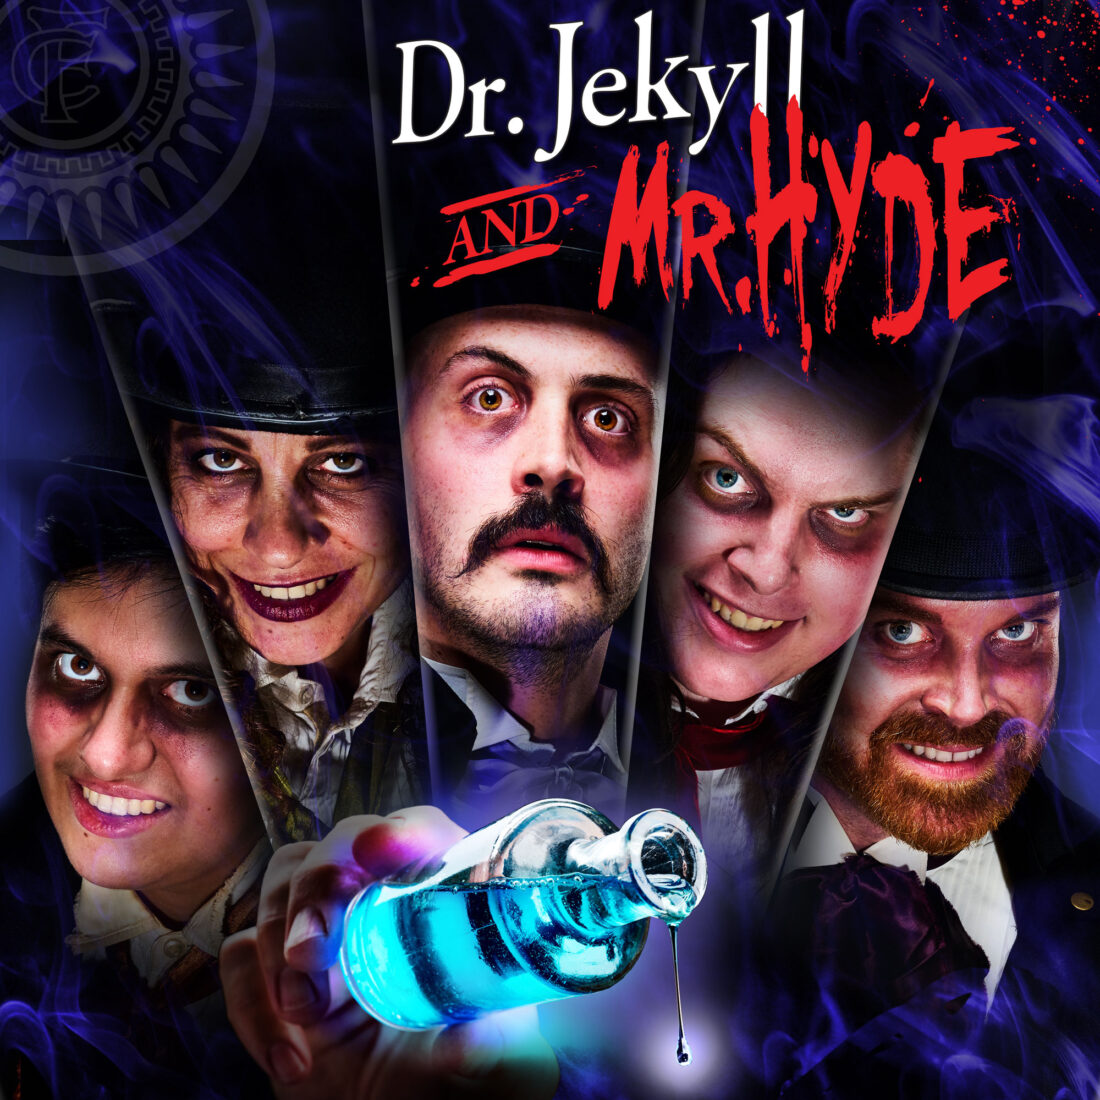 A spooky play poster build for Jekyll and Hyde poster